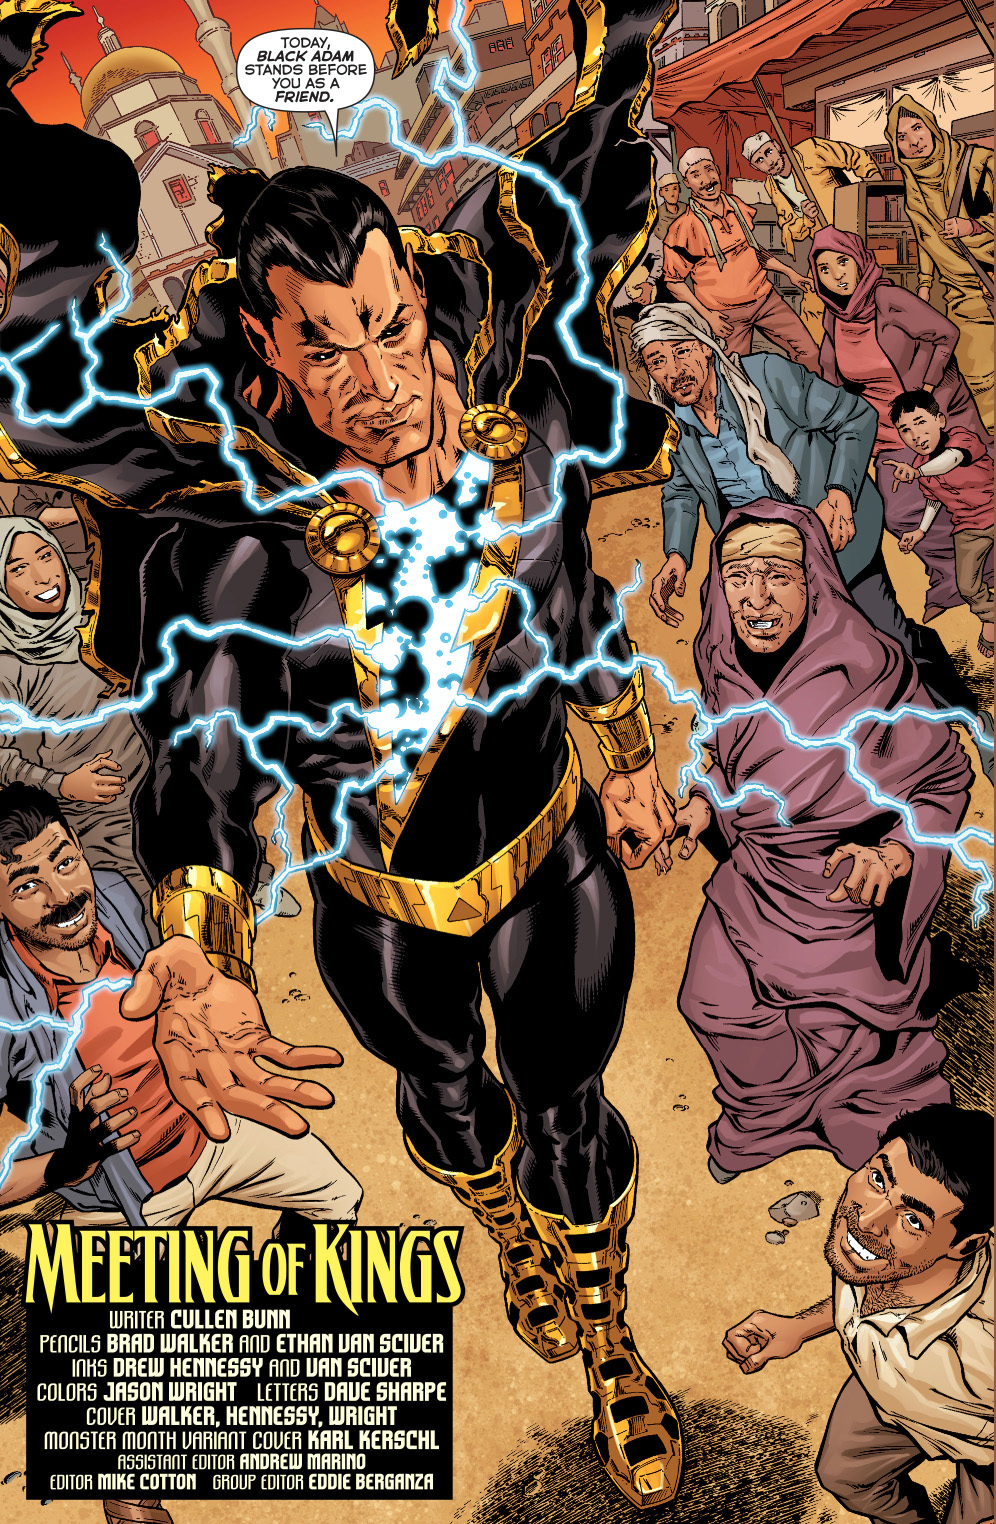 sinestro and his corps visits kahndaq